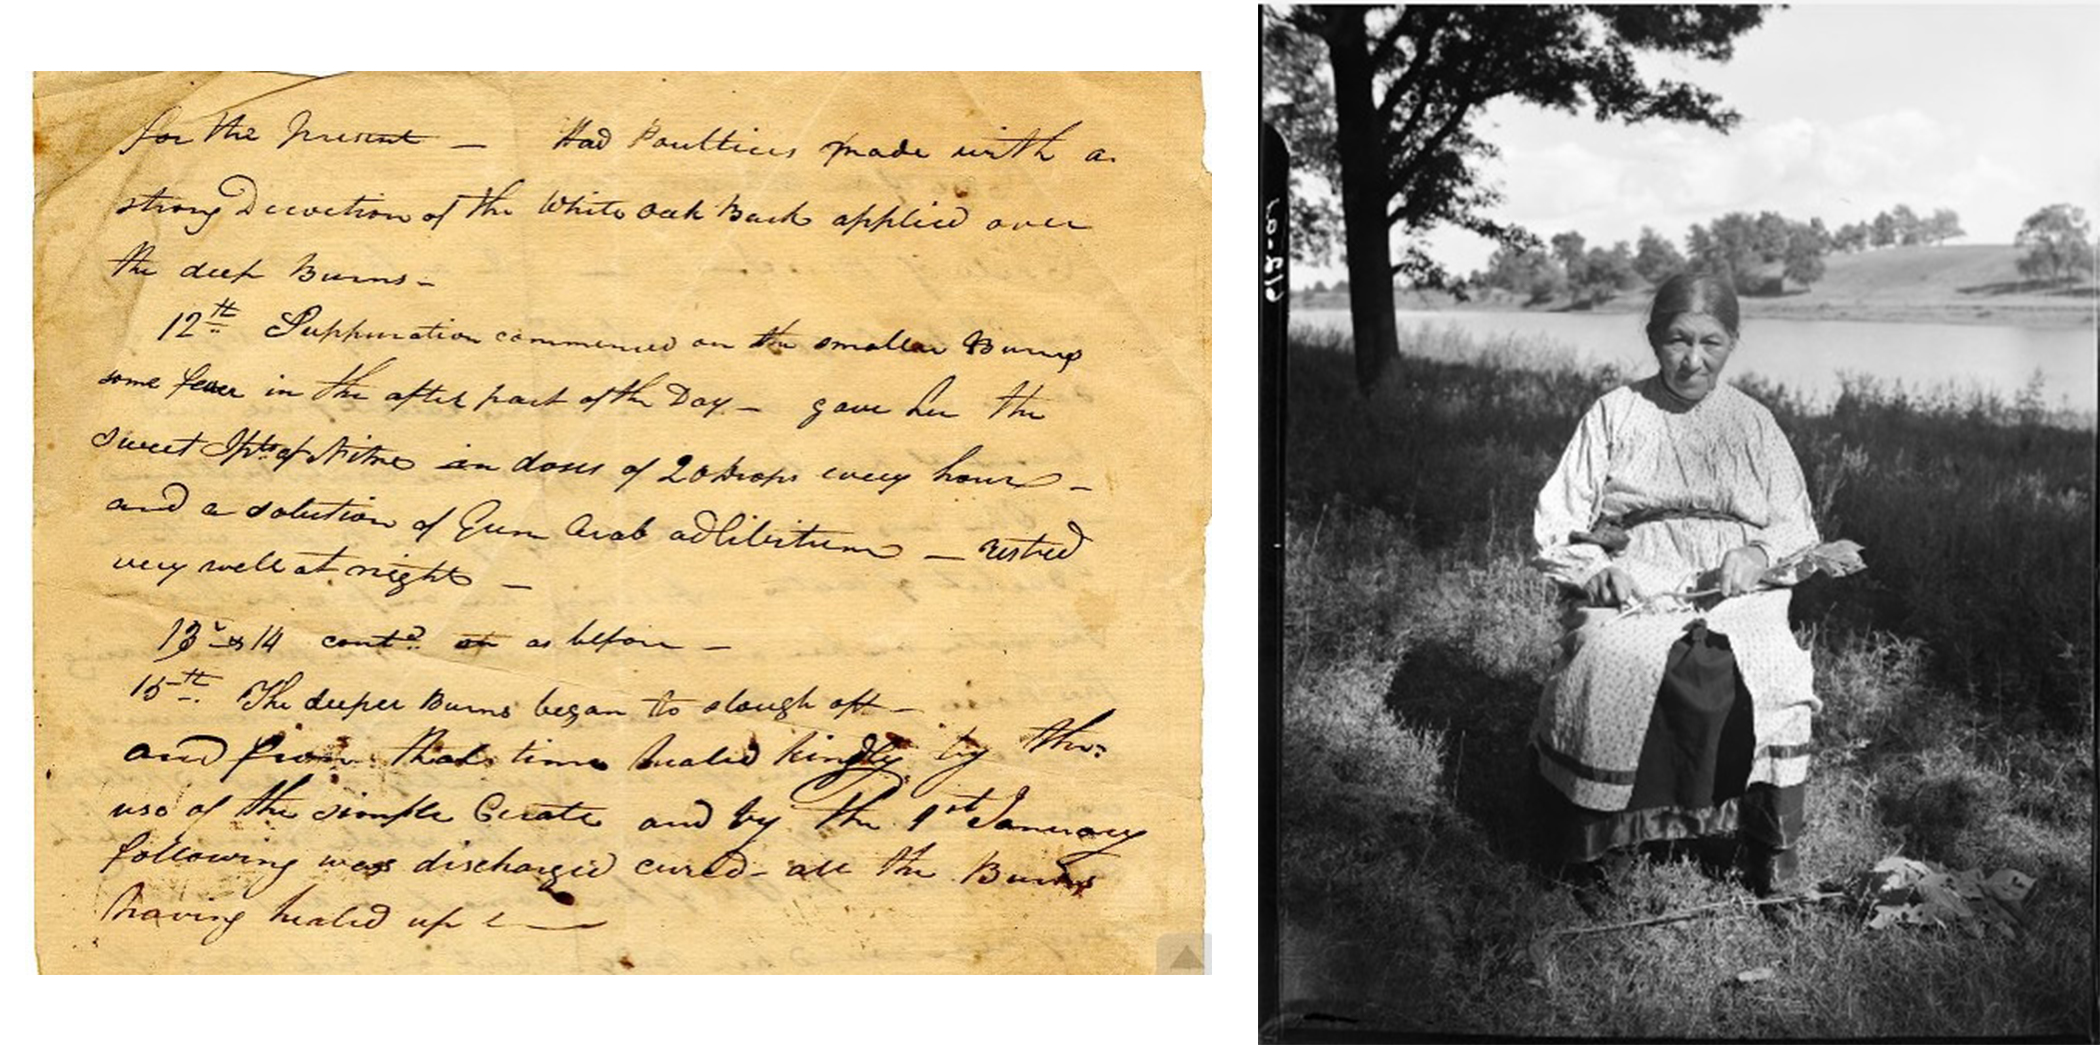 two images side by side. left is a manuscript, right is a black and white photo of a woman